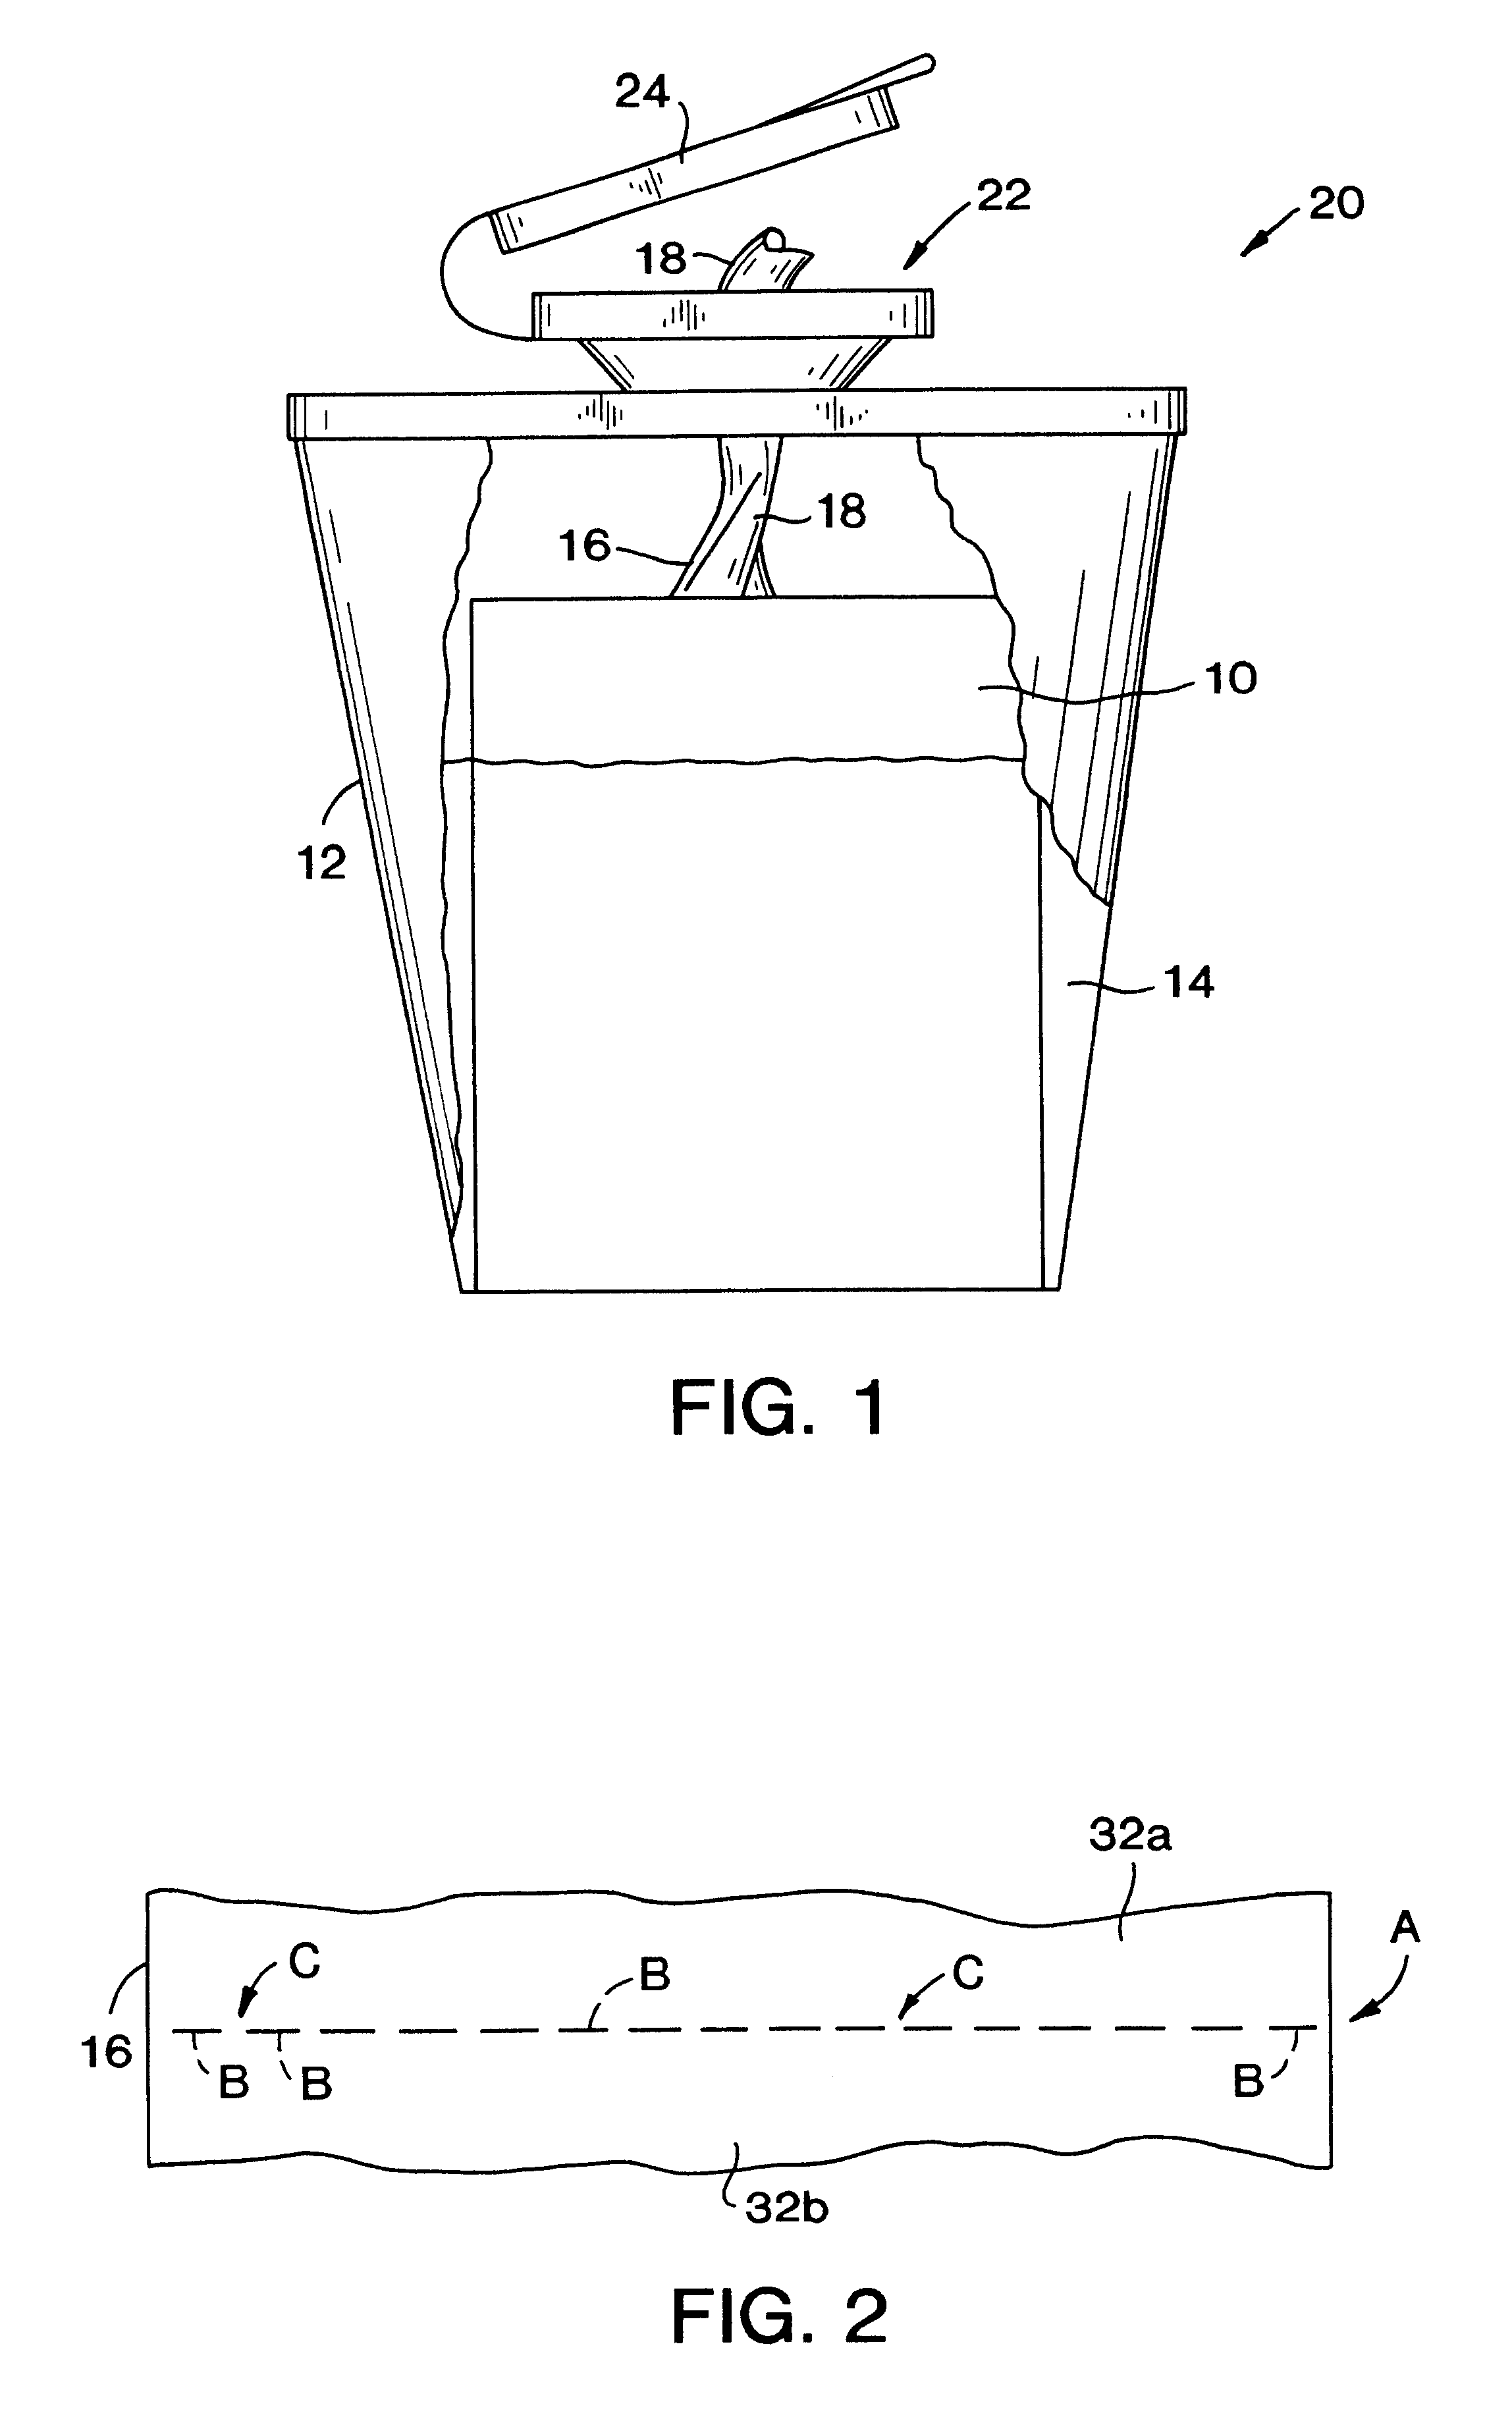 Perforated centerflow rolled product